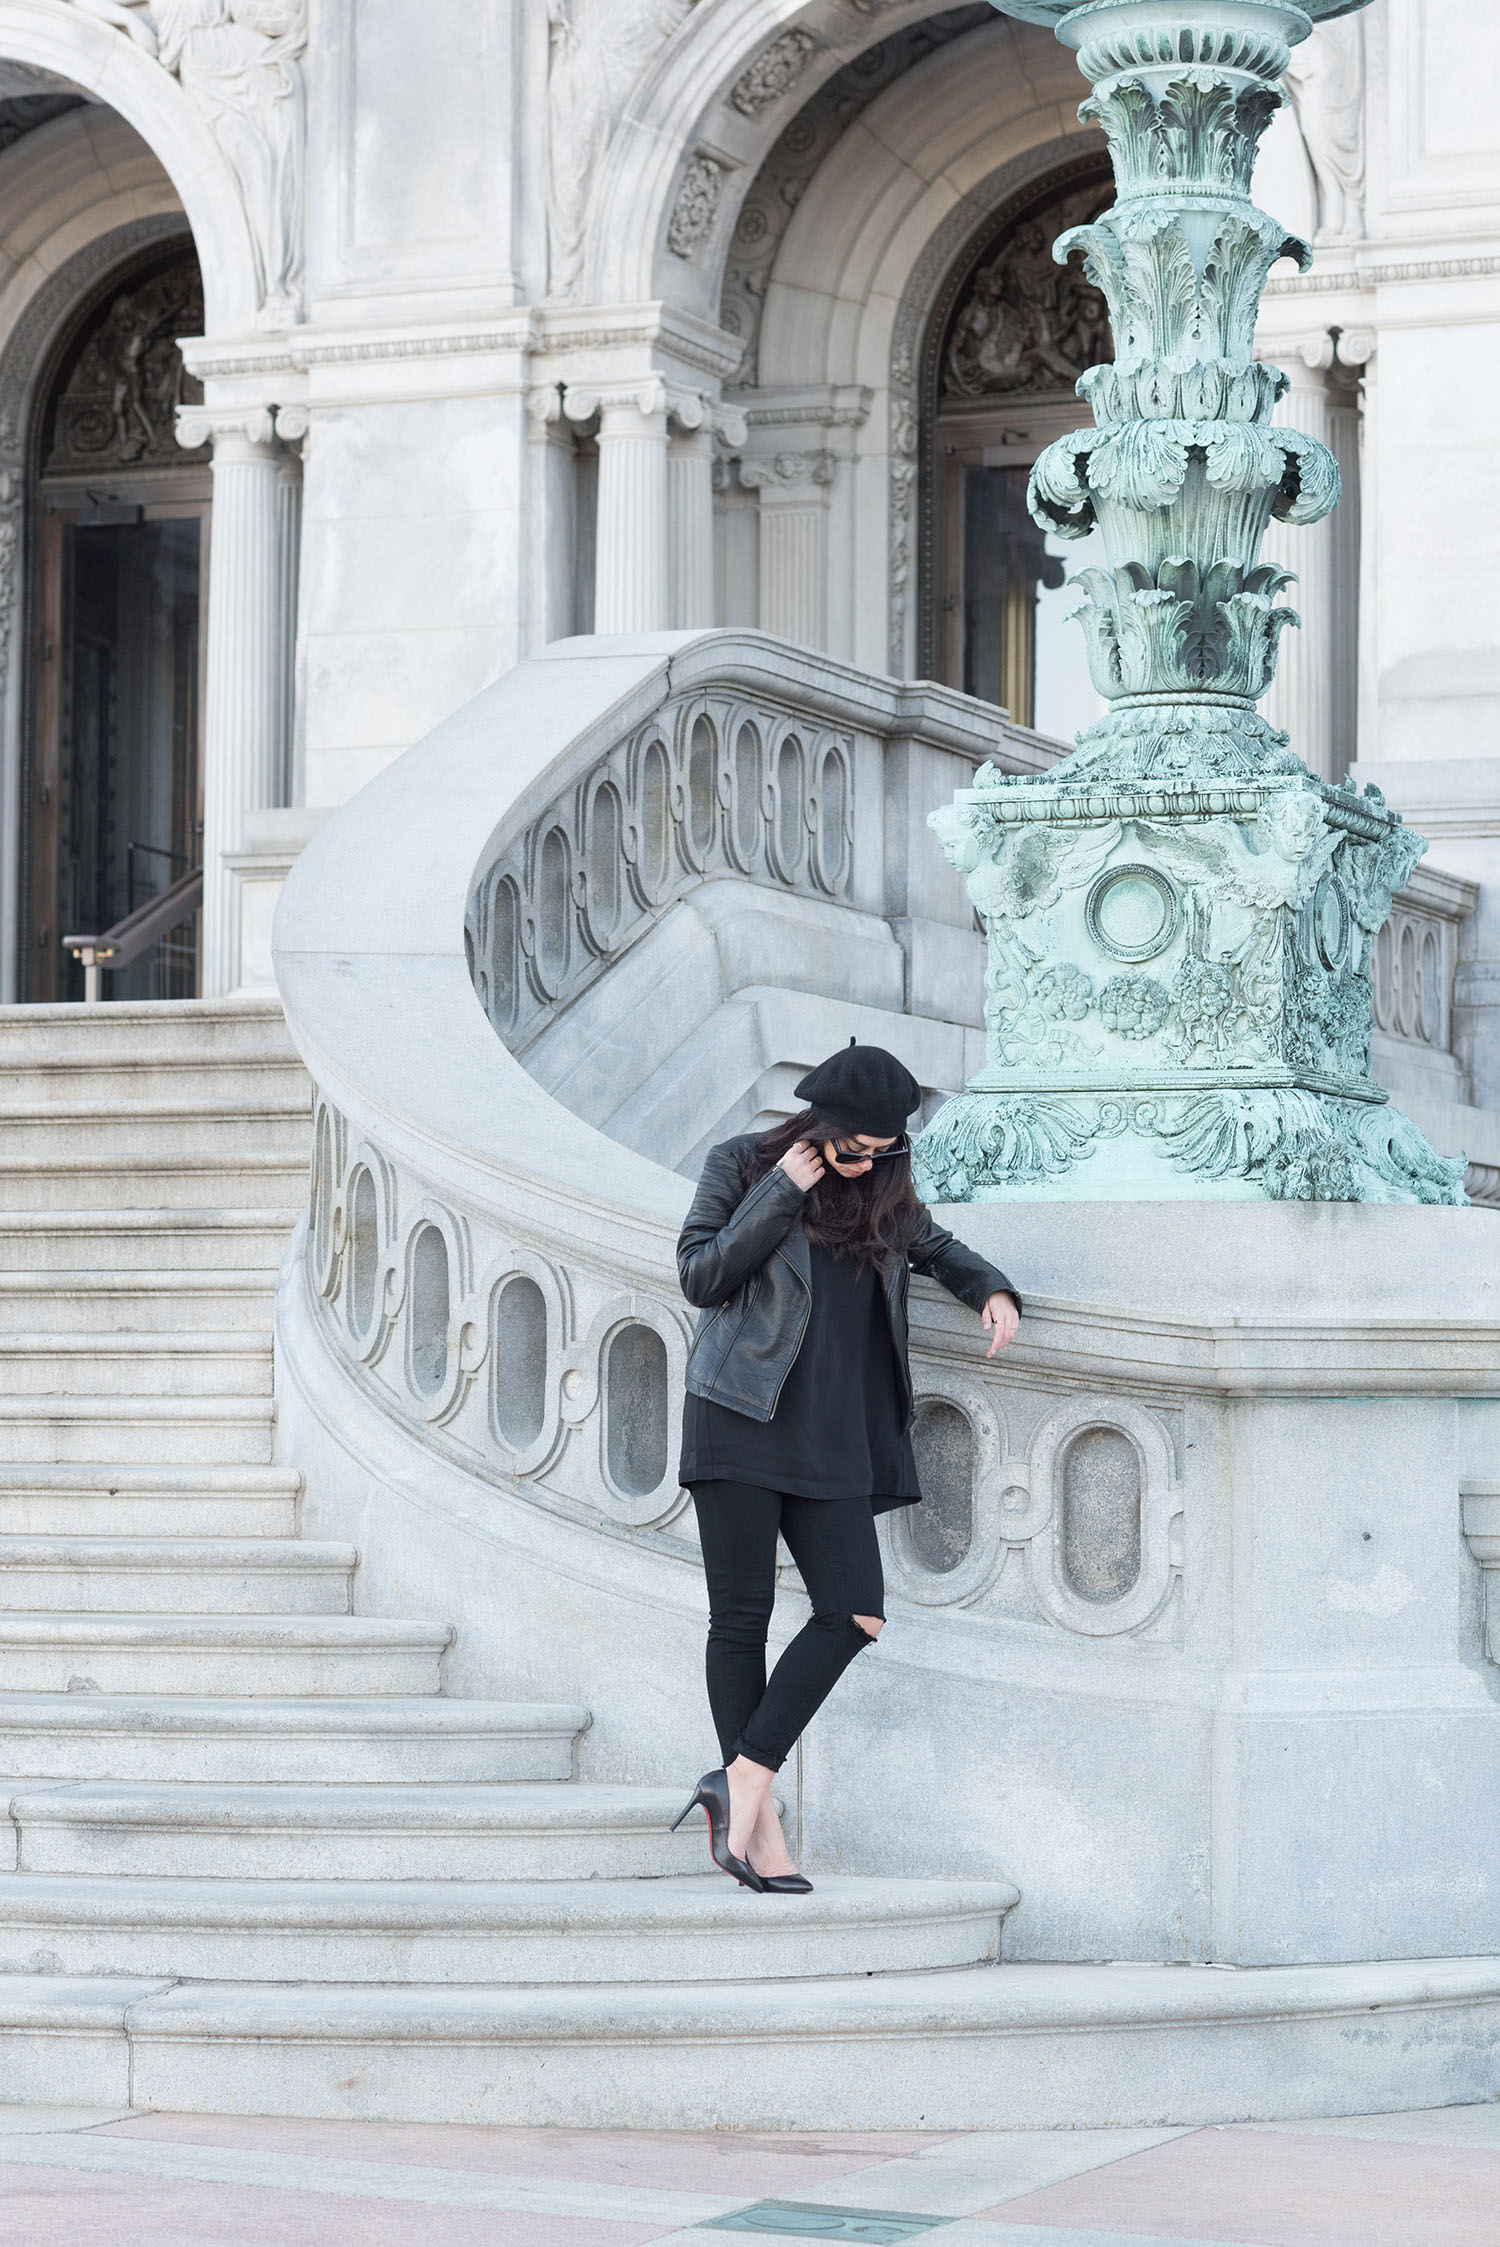 Canadian fashion blogger Cee Fardoe of Coco & Vera stands outside the Library of Congress wearing Paige jeans and Christian Louboutin Pigalle pumps